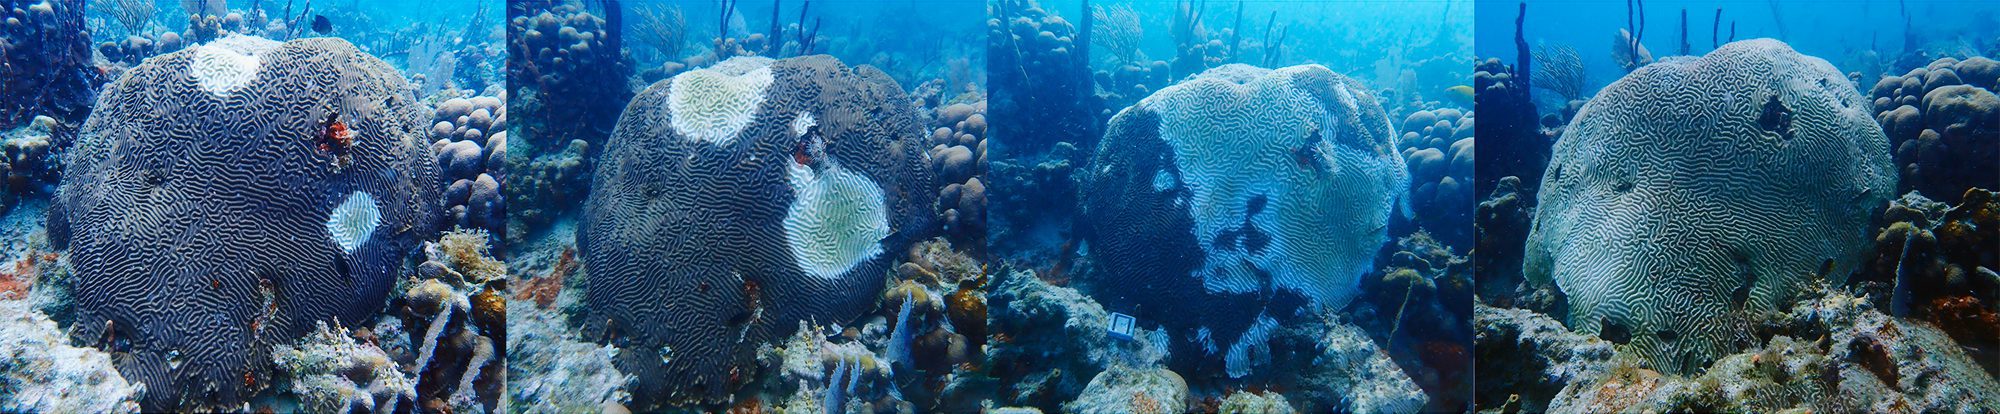 A time series shows the swift progression of stony coral tissue loss disease on a boulder brain coral colony (Colpophyllia natans) in the U.S. Virgin Islands. (Photo courtesy of Sonora Meiling, © The University of the Virgin Islands)